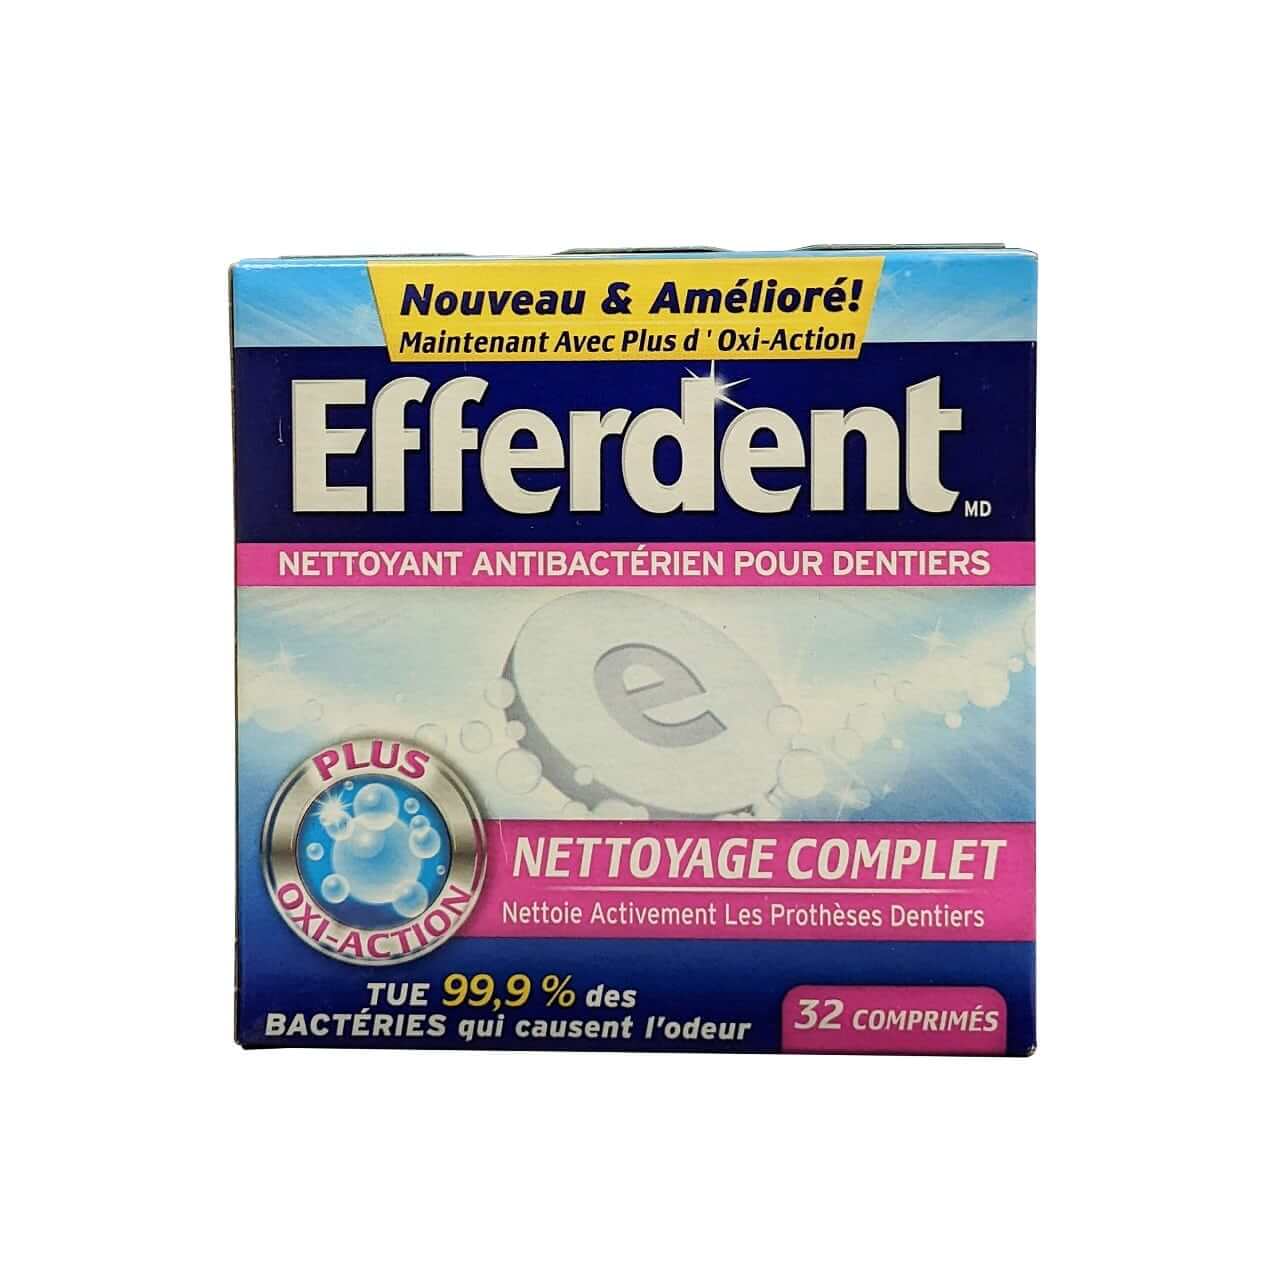 Product label for Efferdent Complete Clean Antibacterial Denture Cleanser (32 tablets) in French